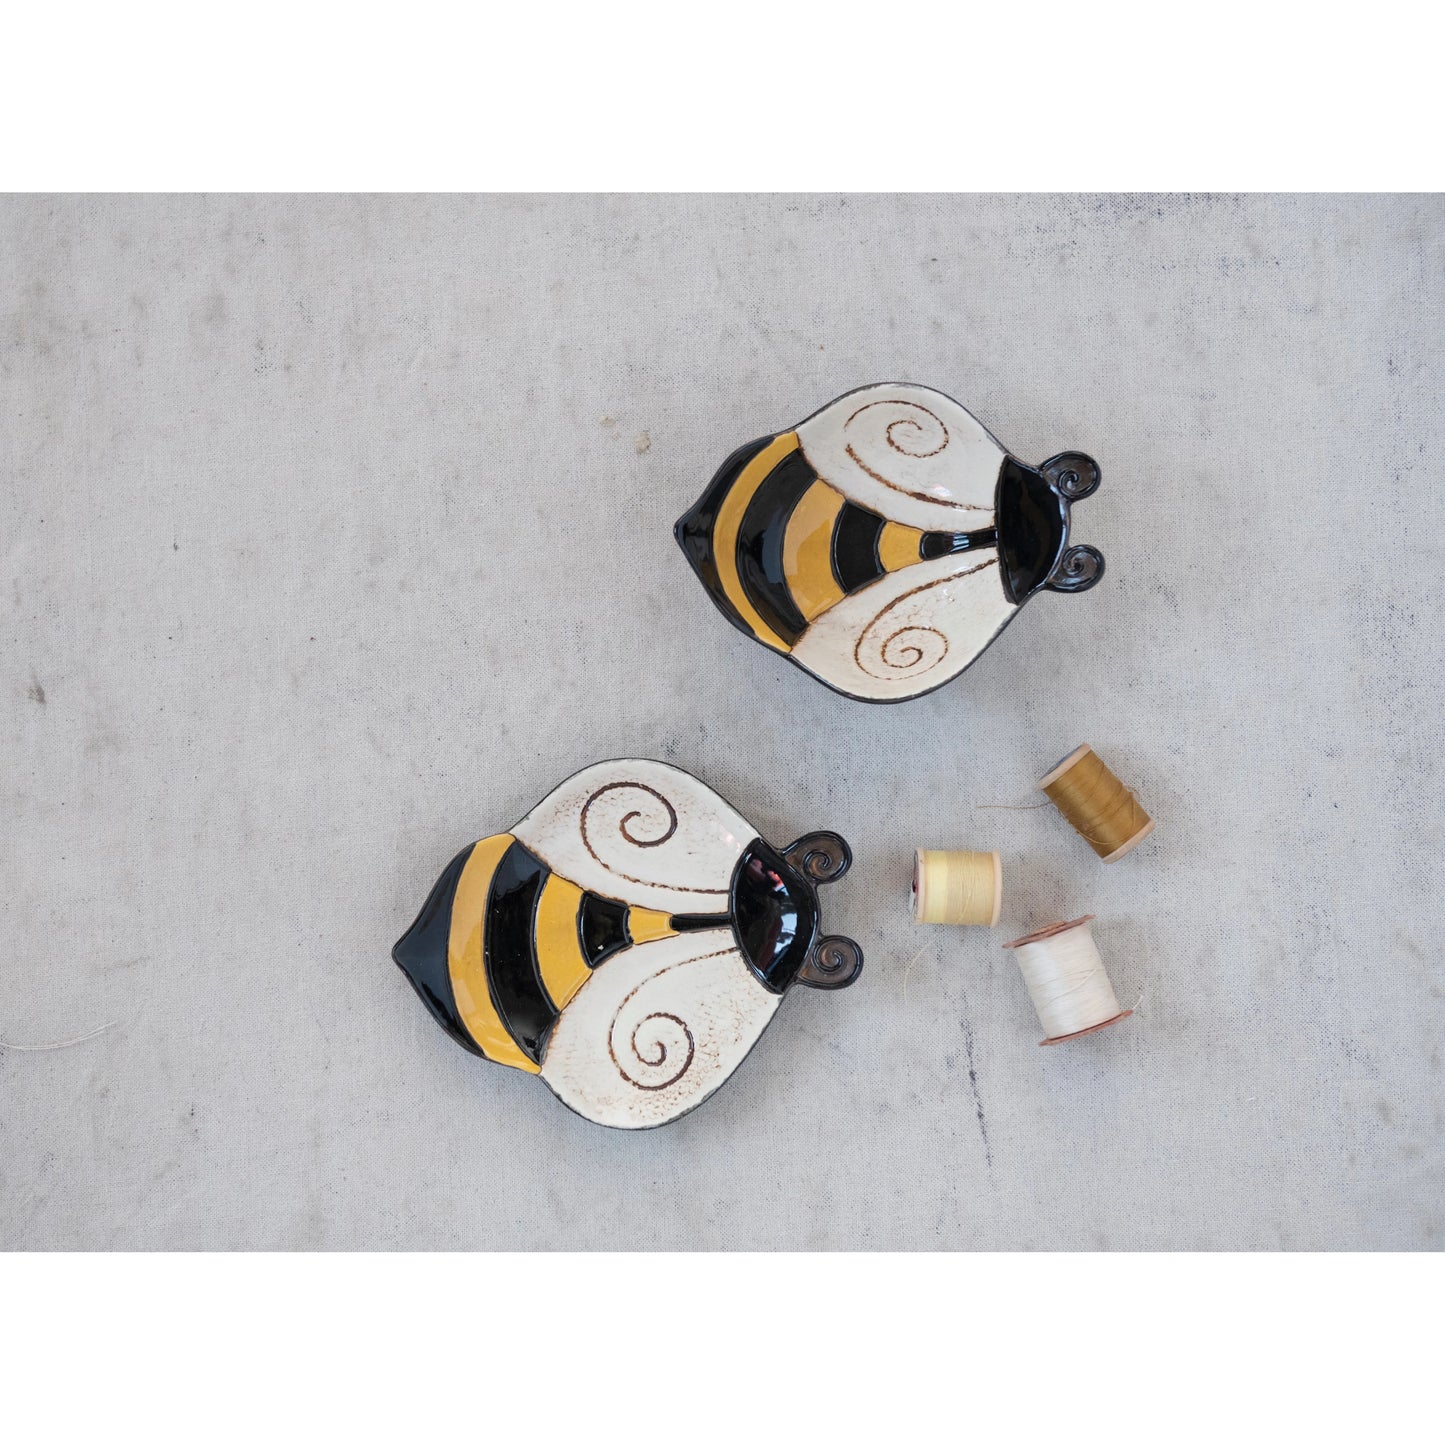 two hand painted stoneware bee bowls displayed next to three spools of thread on a light gray background